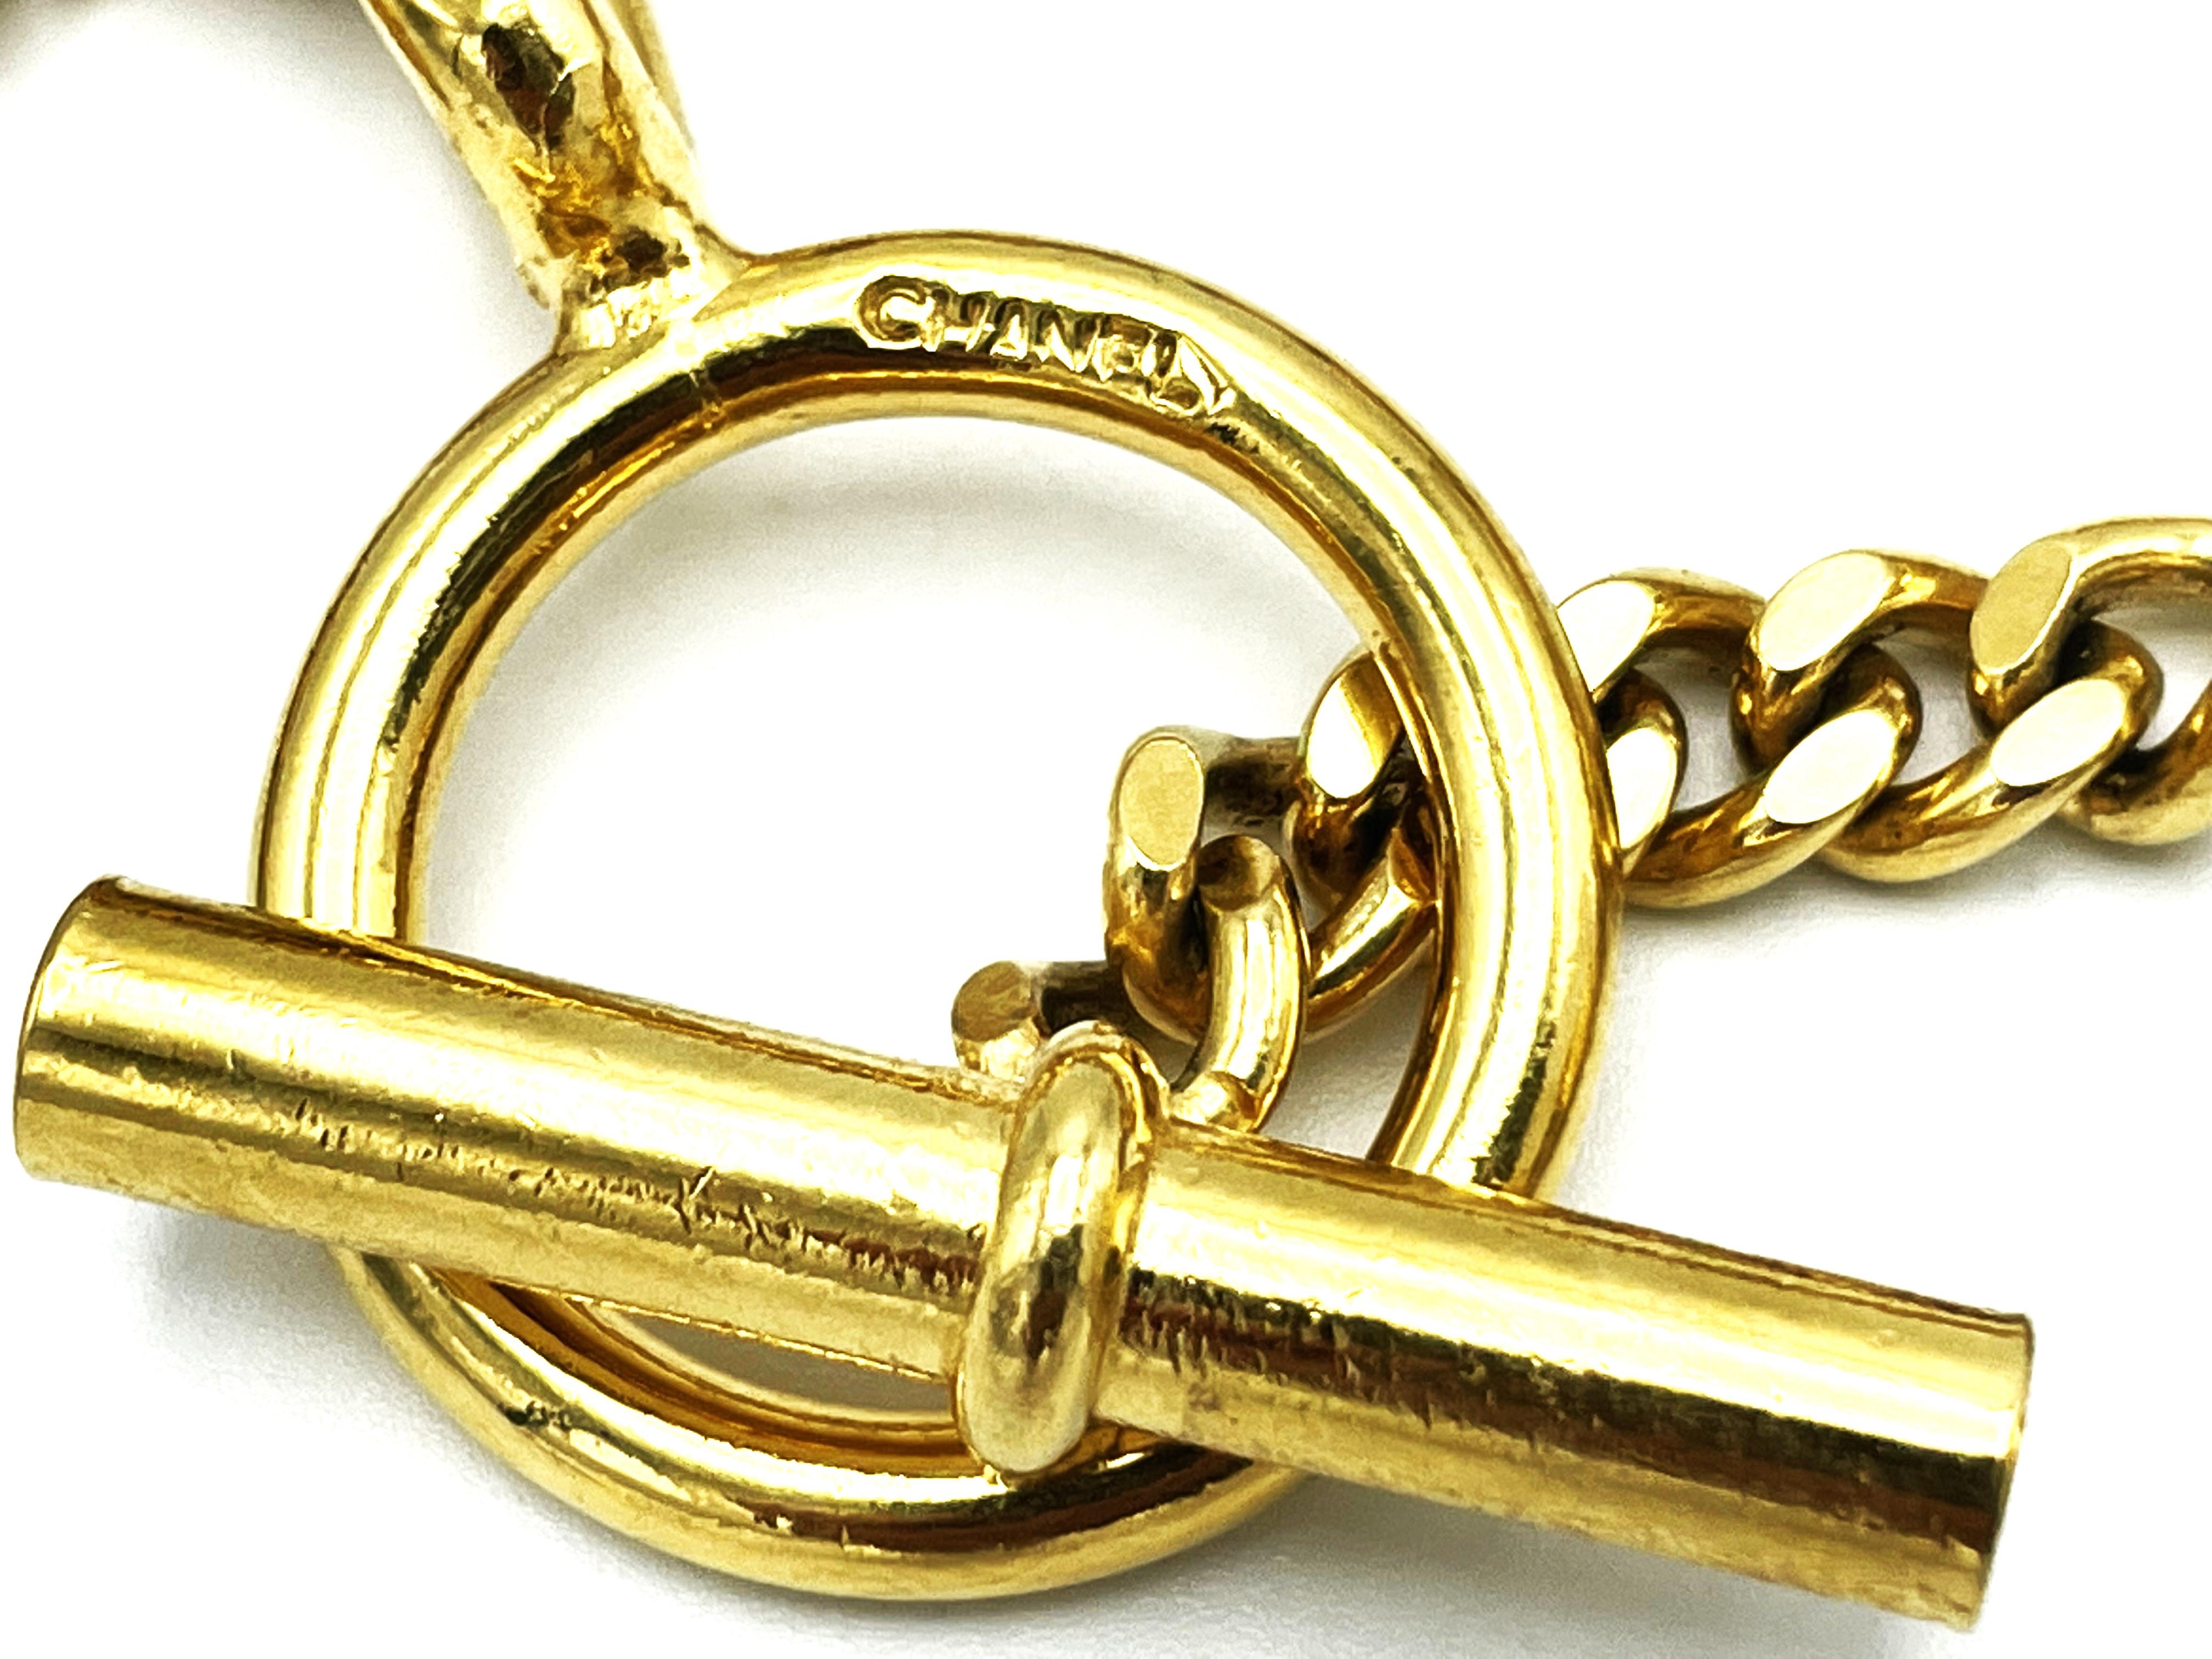 Women's CHANEL lucky charm bracelet with 7 iconic Chanel pendants gold-plated, 1990 For Sale